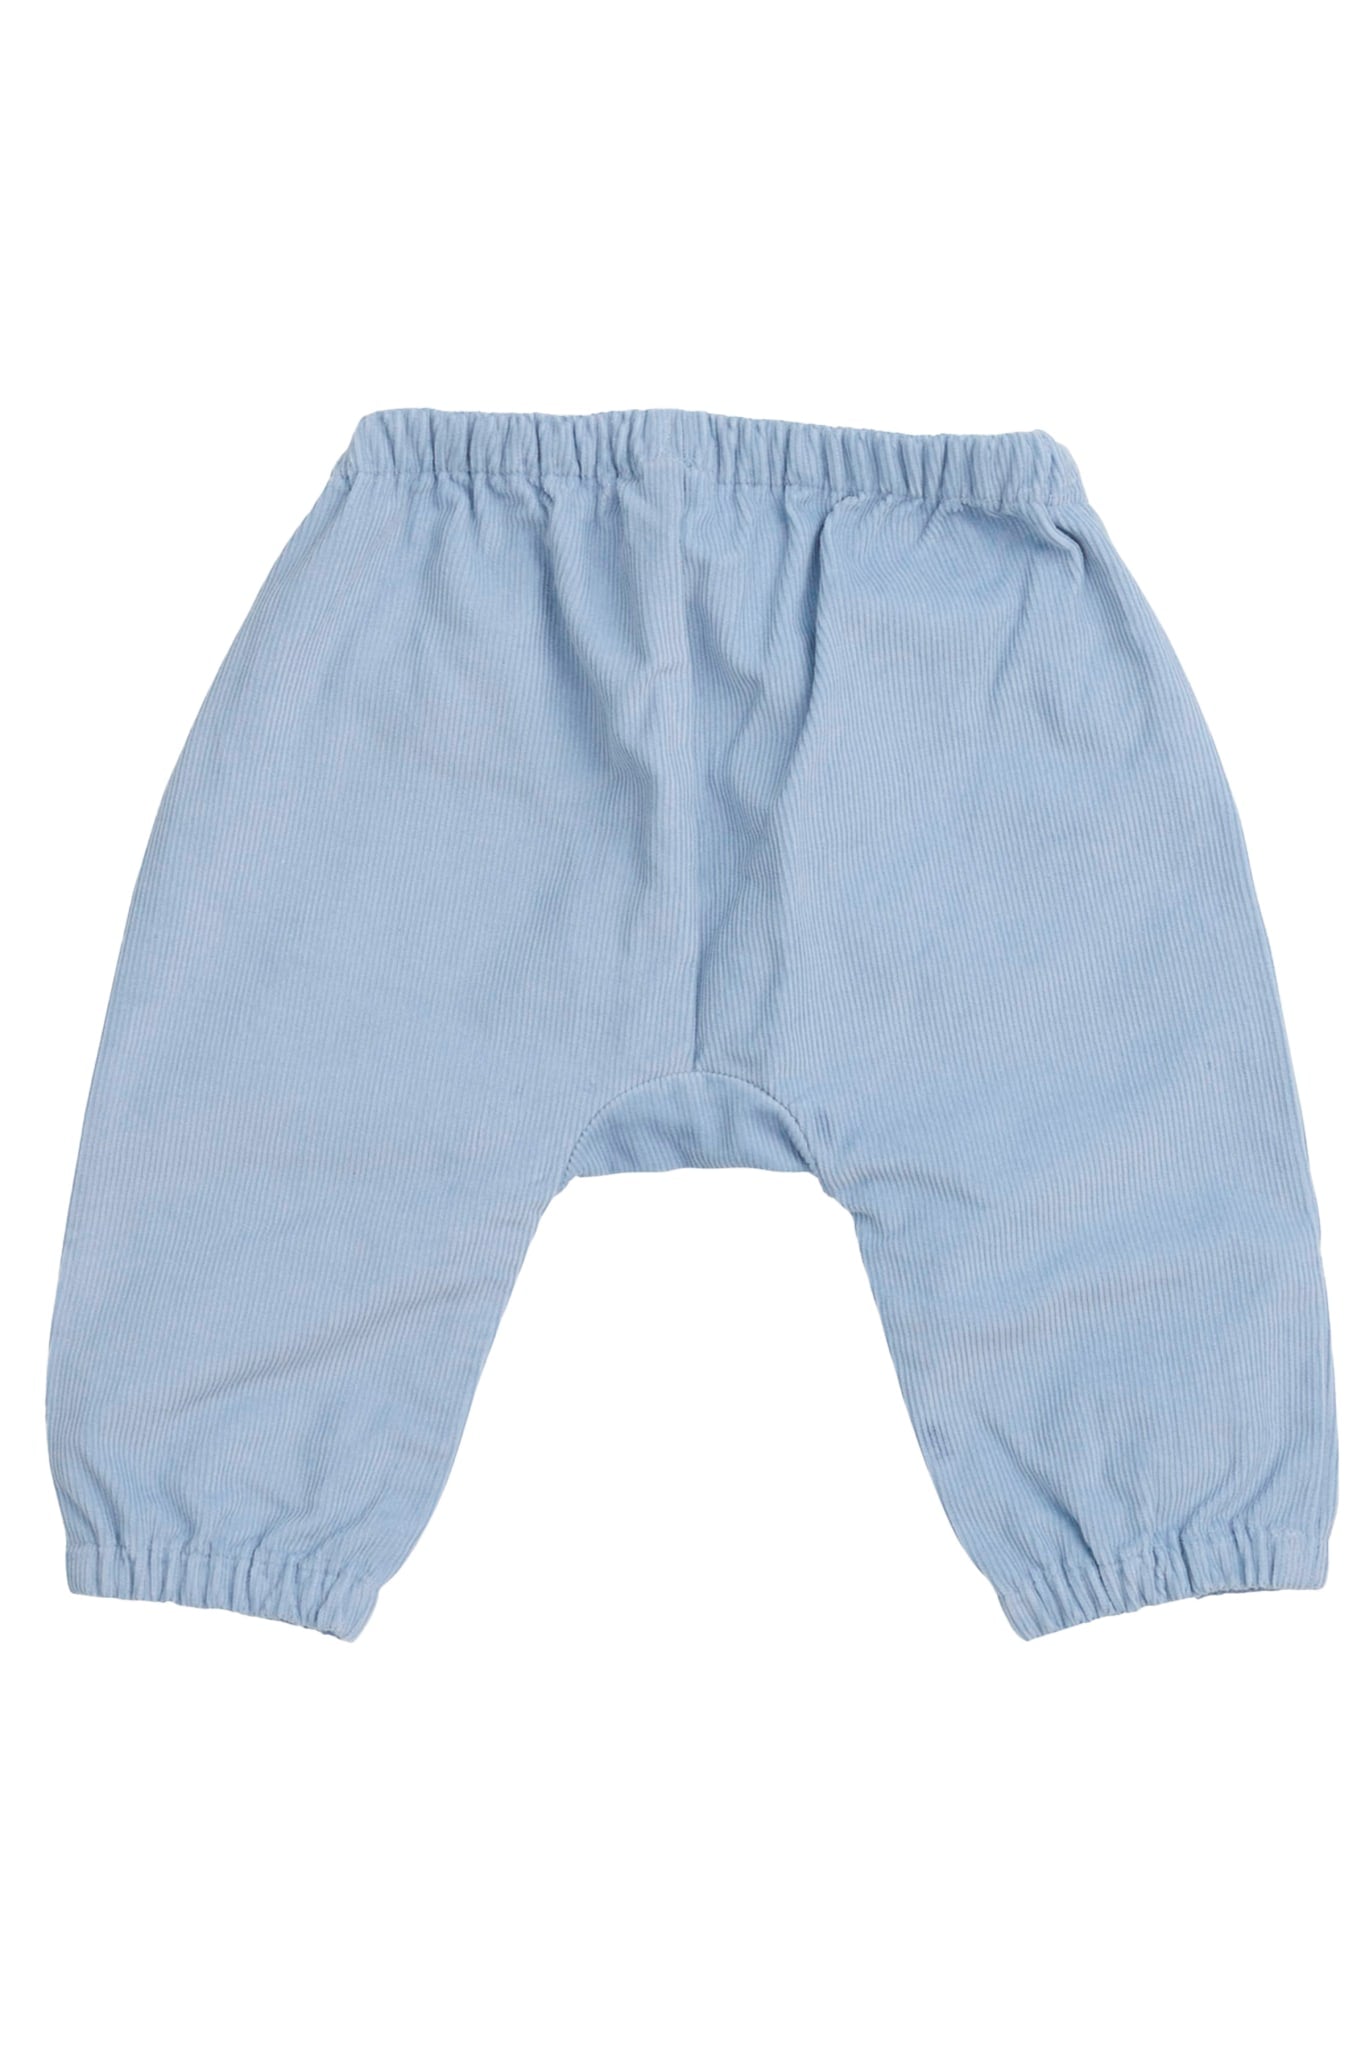 CORDUROY PANTS FOR BABY - DUSTY BLUE